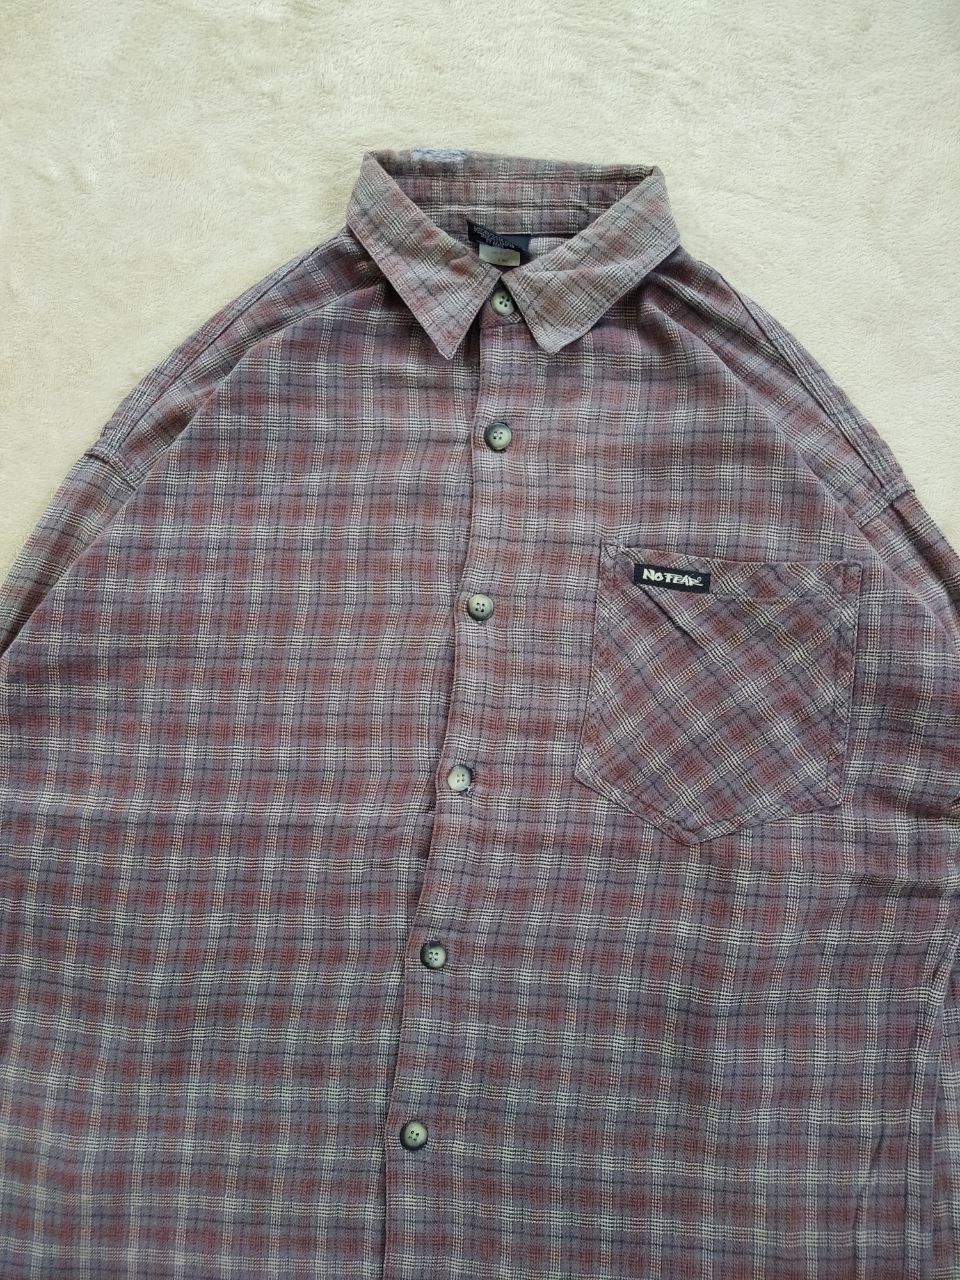 Vintage 90s No Fear Made in USA Old Skool Plaid Shirt - 4